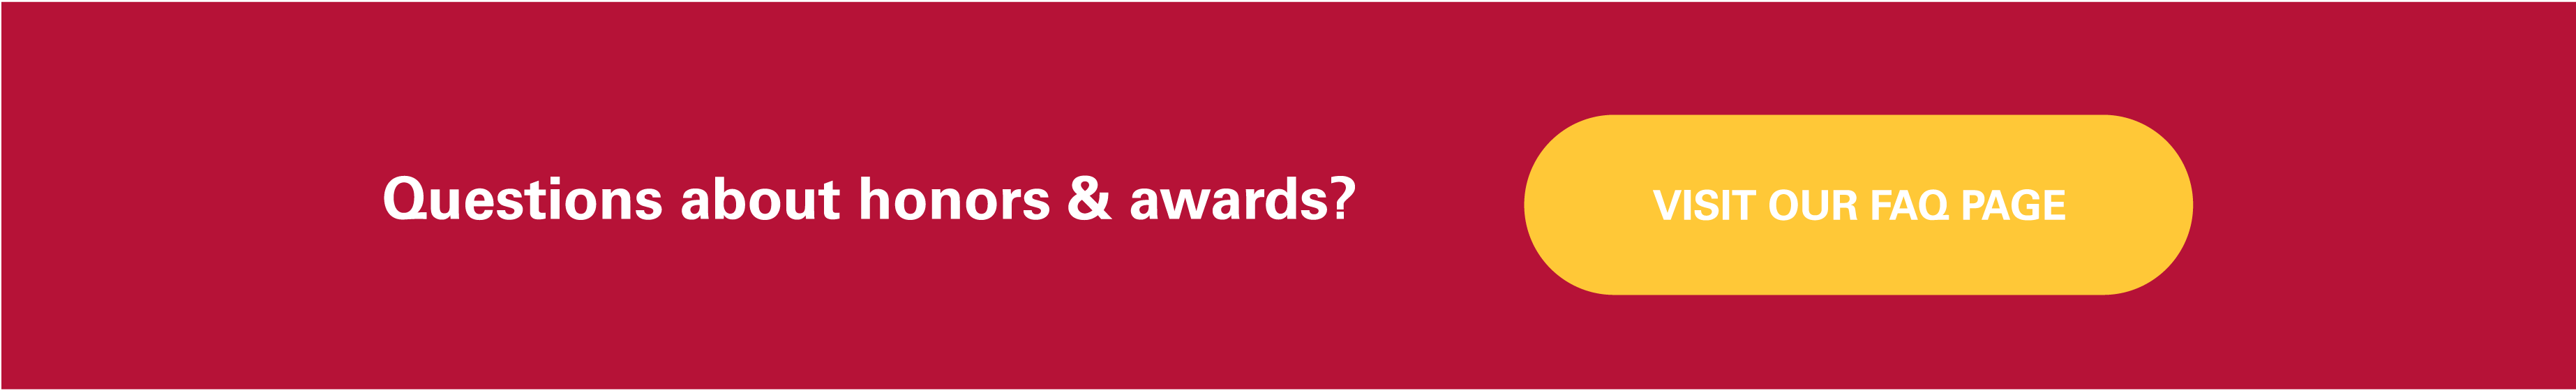 Questions about Honors and Awards? Visit our FAQ page.